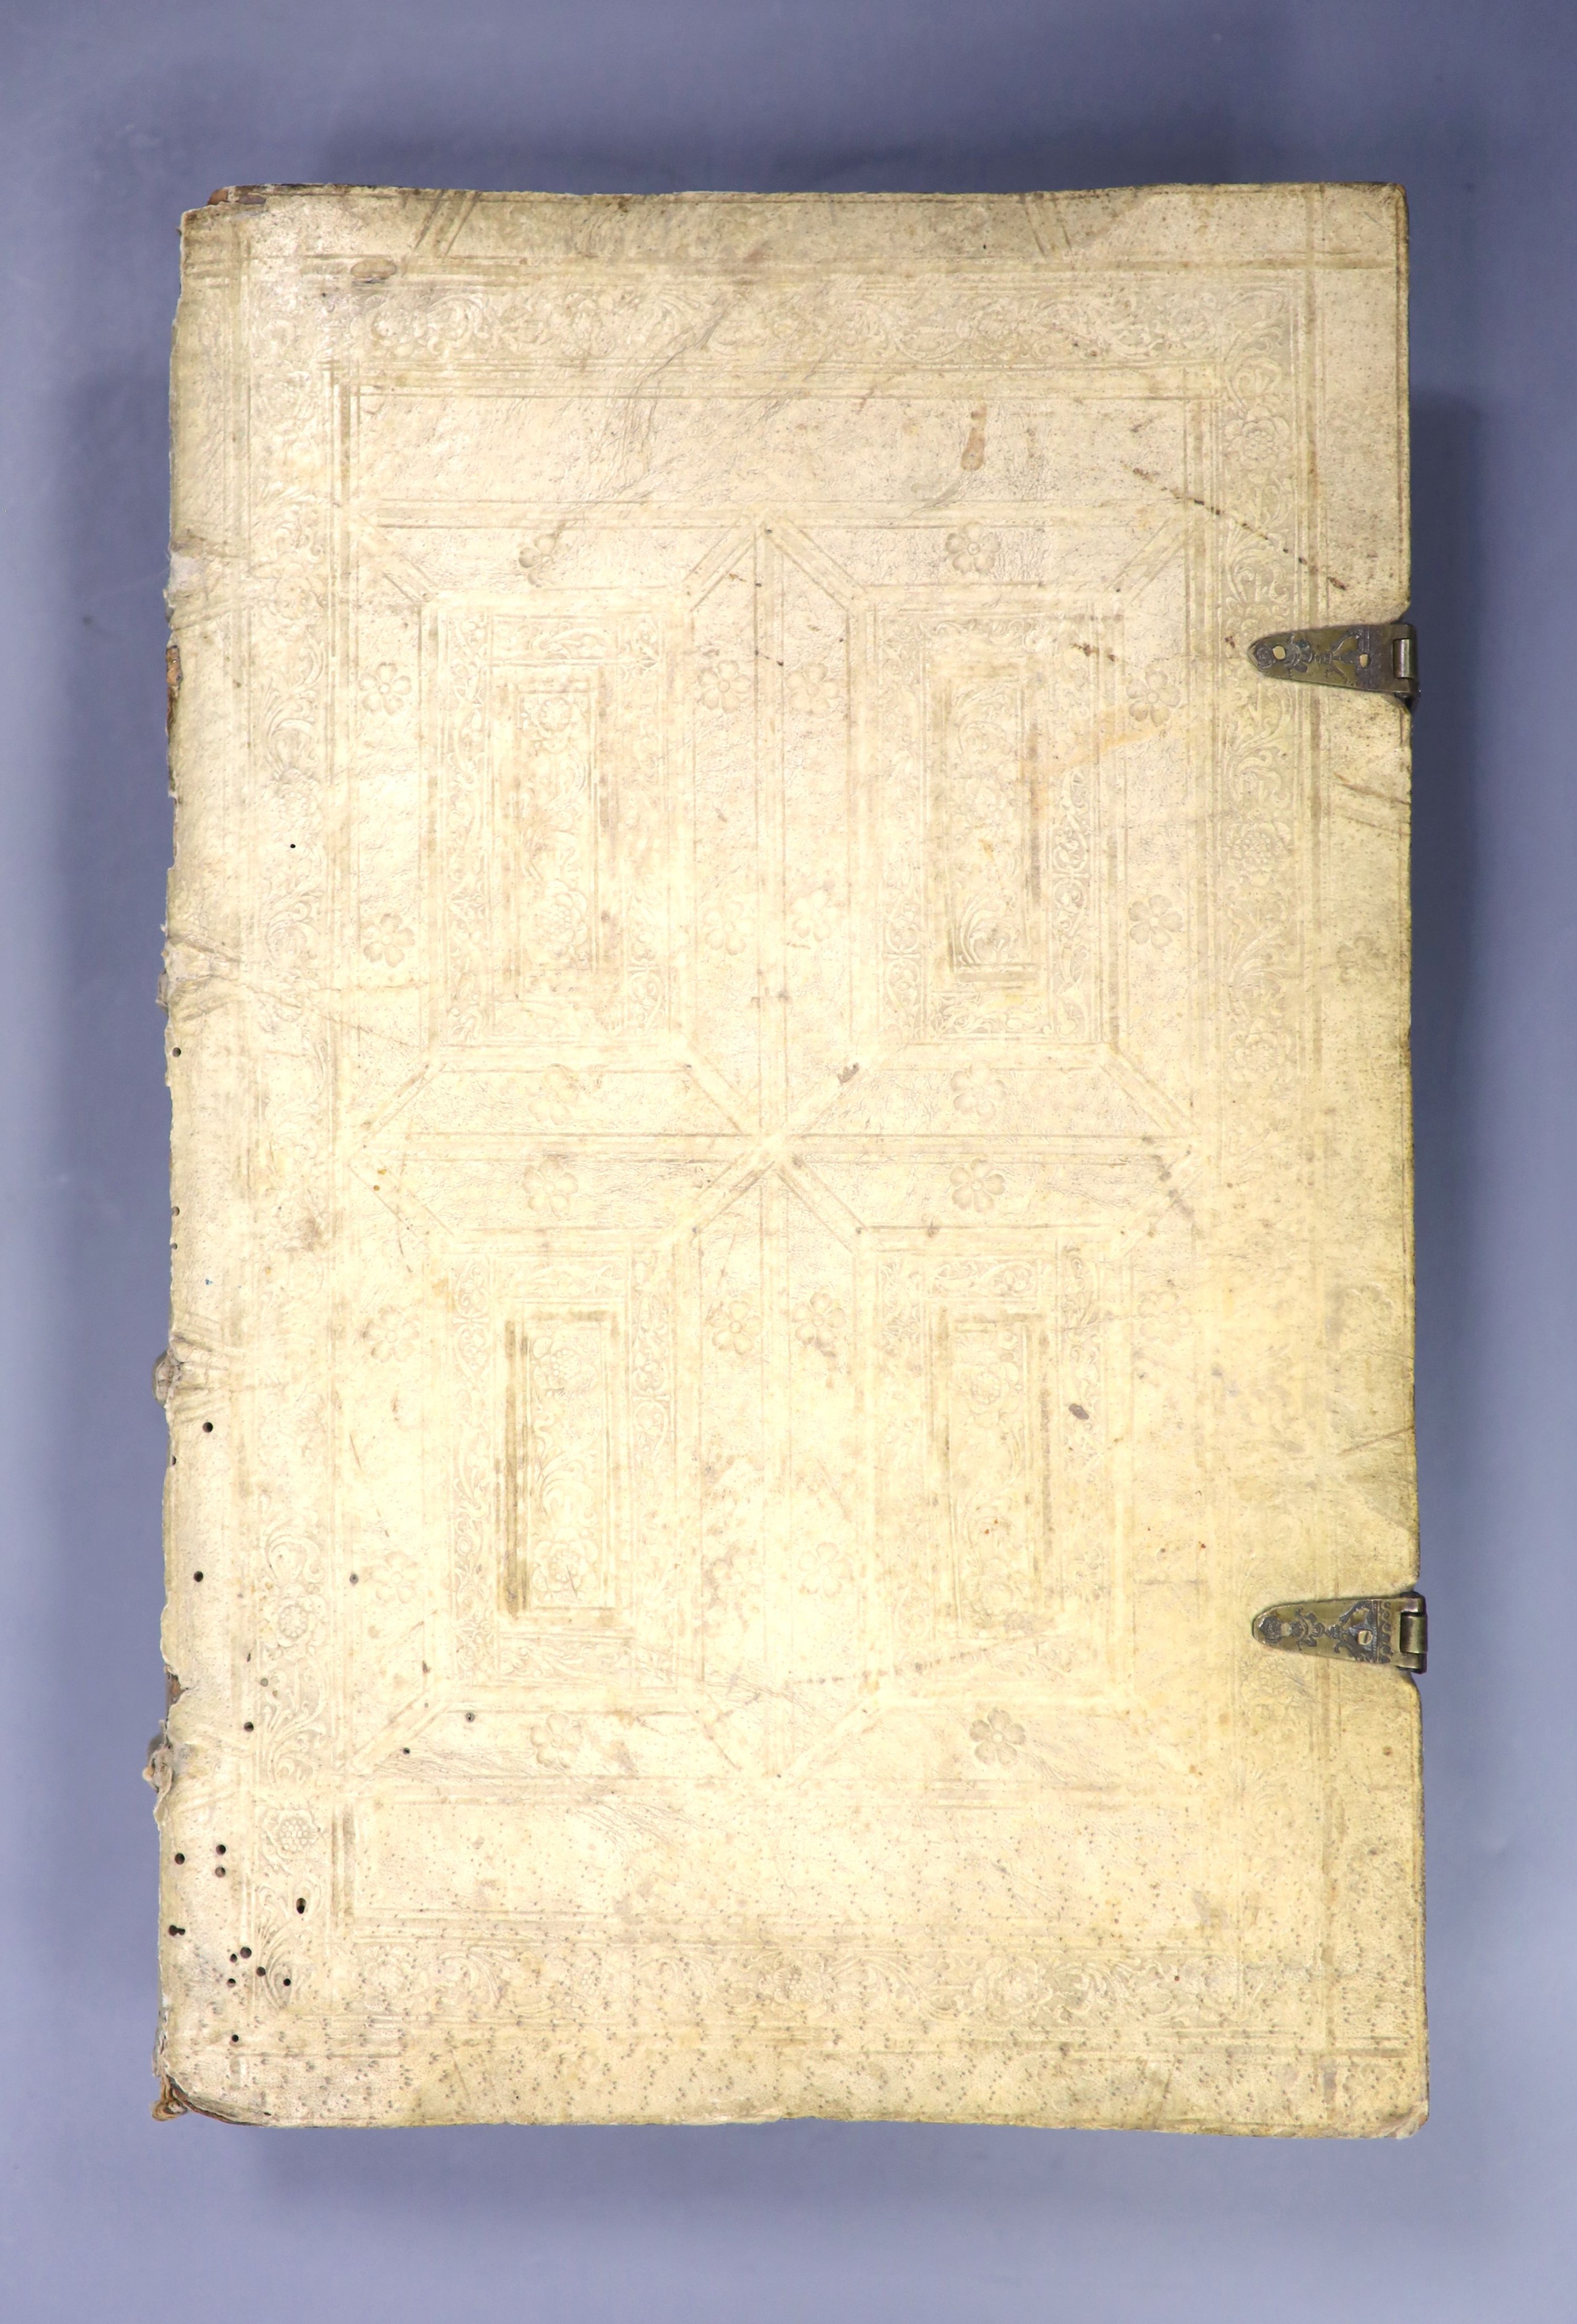 Carthusianus, Dionysius - D.Dionyii Carthusiani Insigne Opus Commentariorrum In Psalmos Omnes Davidicos, folio, contemporary embossed vellum with brass clasps, cover detached, lacking portrait frontispiece, boards with s